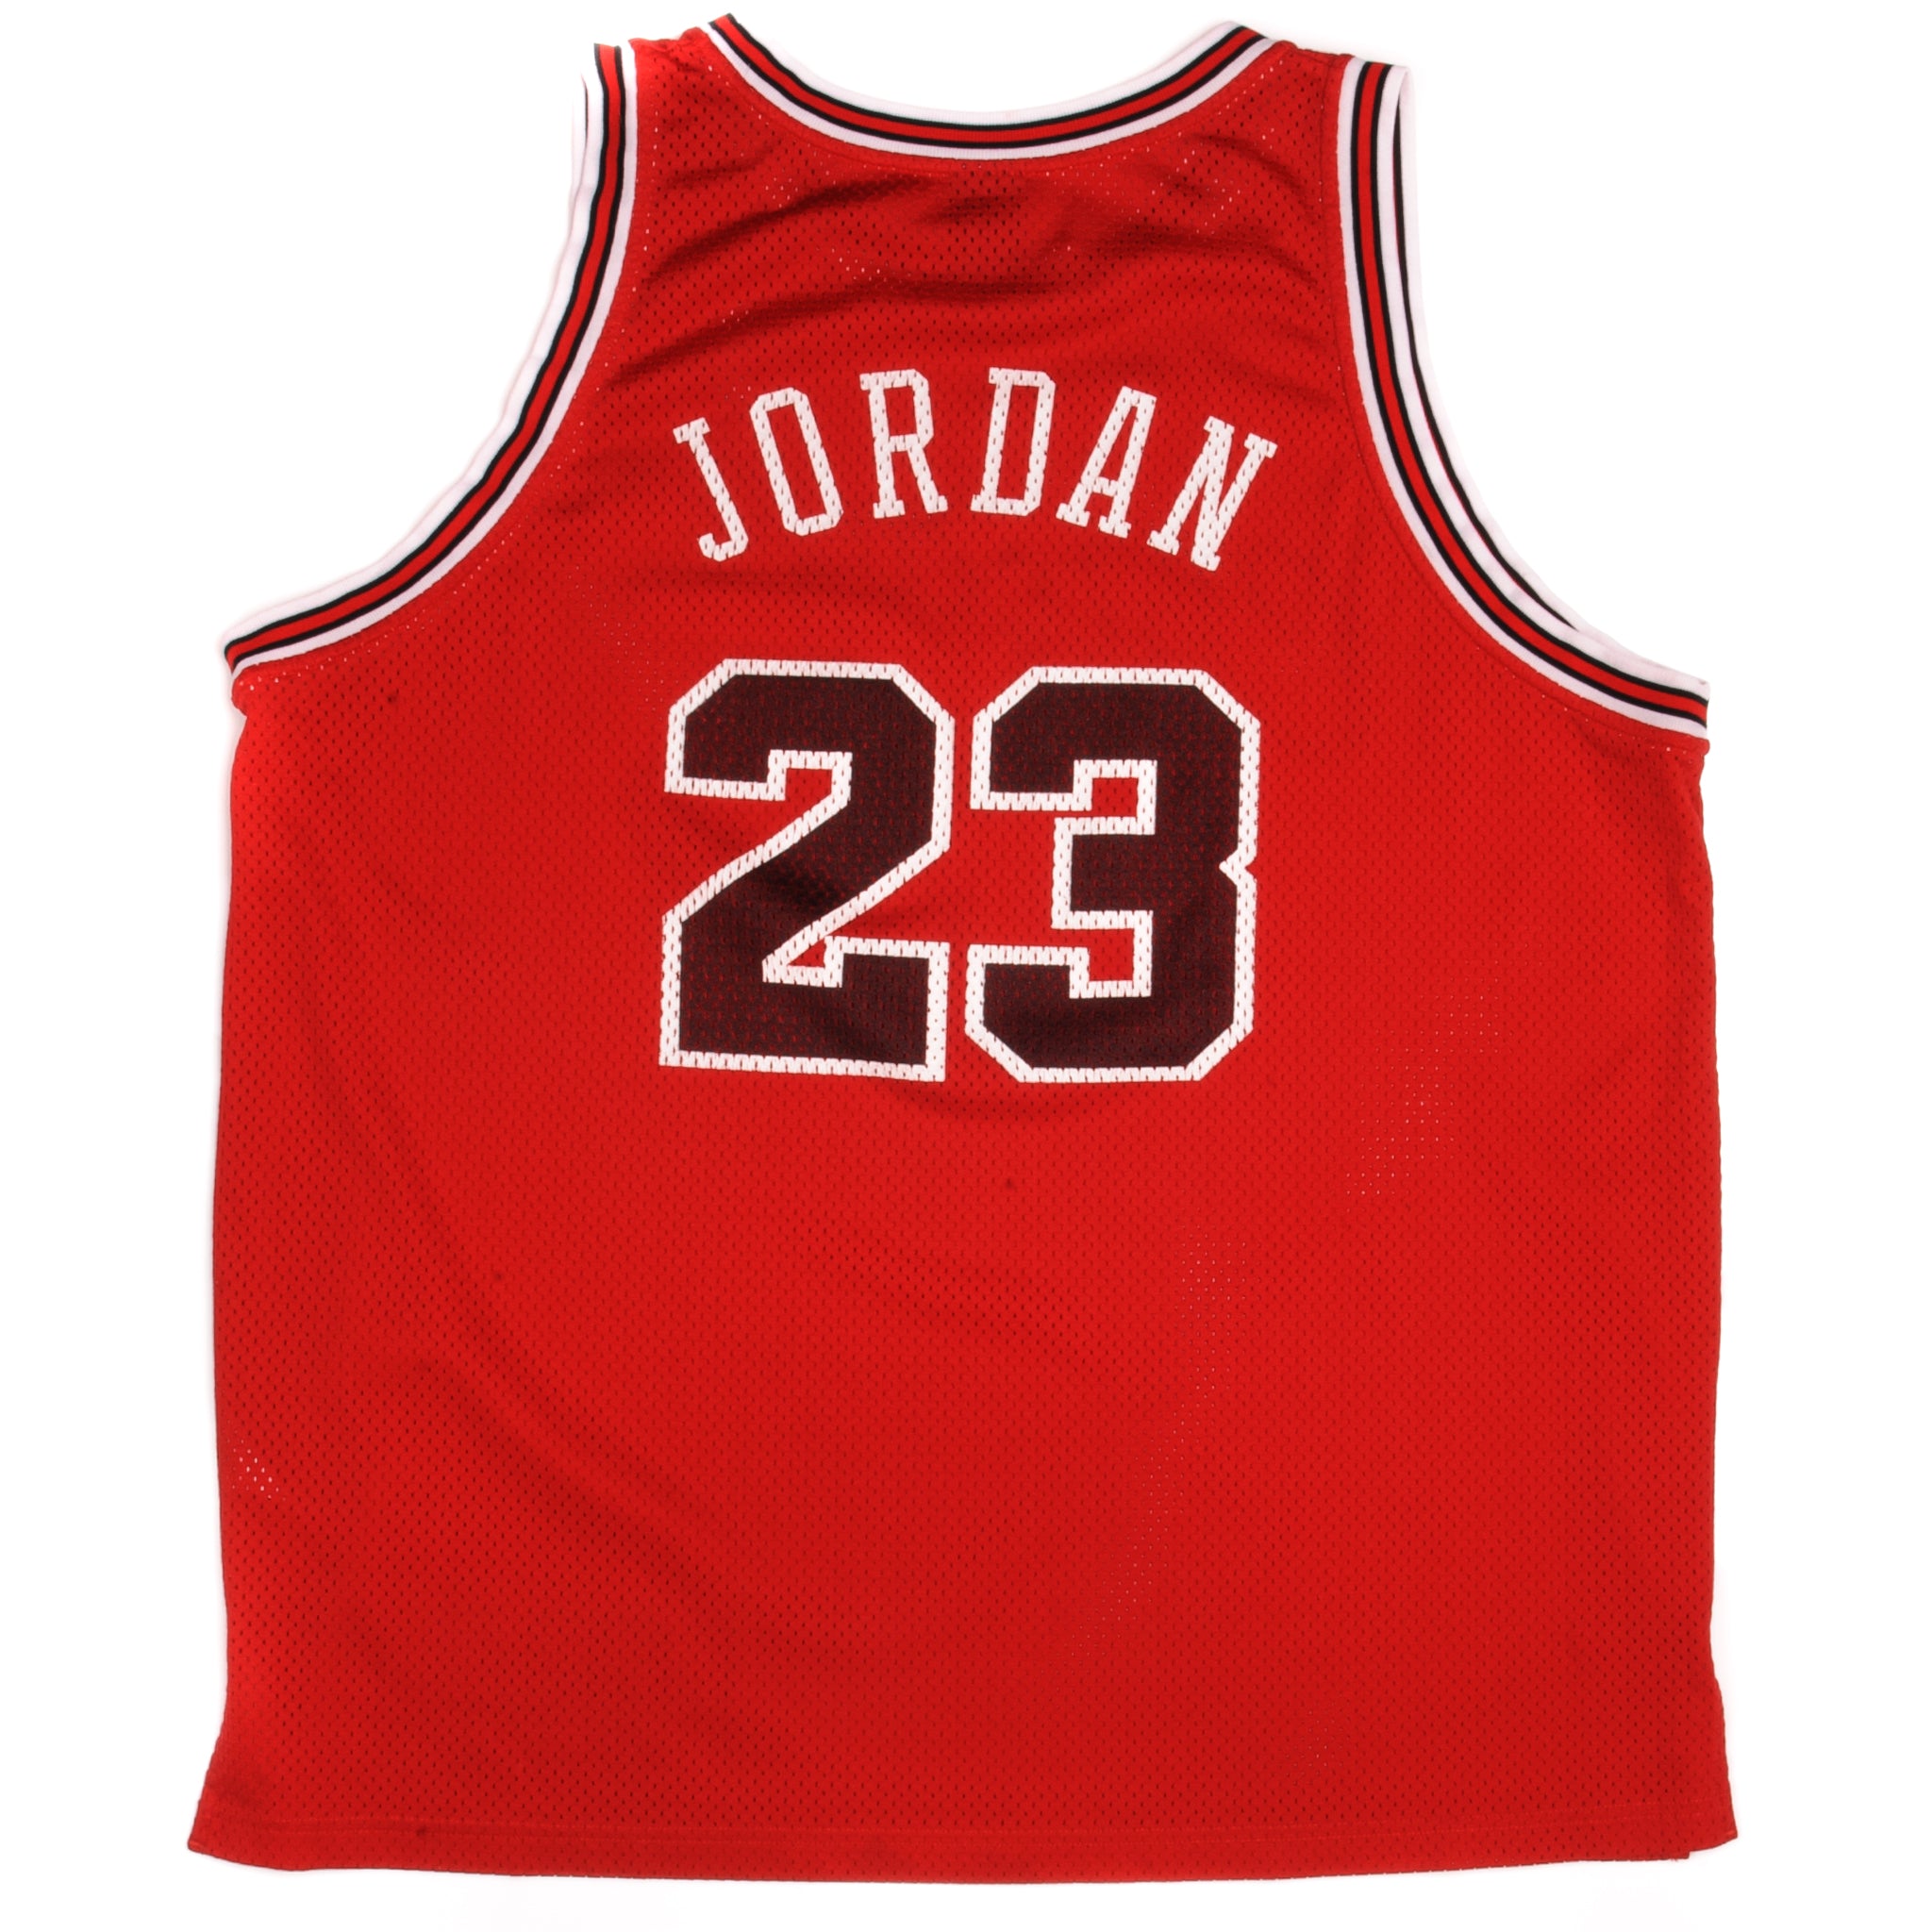 NIKE NBA Jersey Sizing, WHAT SIZE NIKE NBA JERSEY SHOULD I GET???, Recommendation